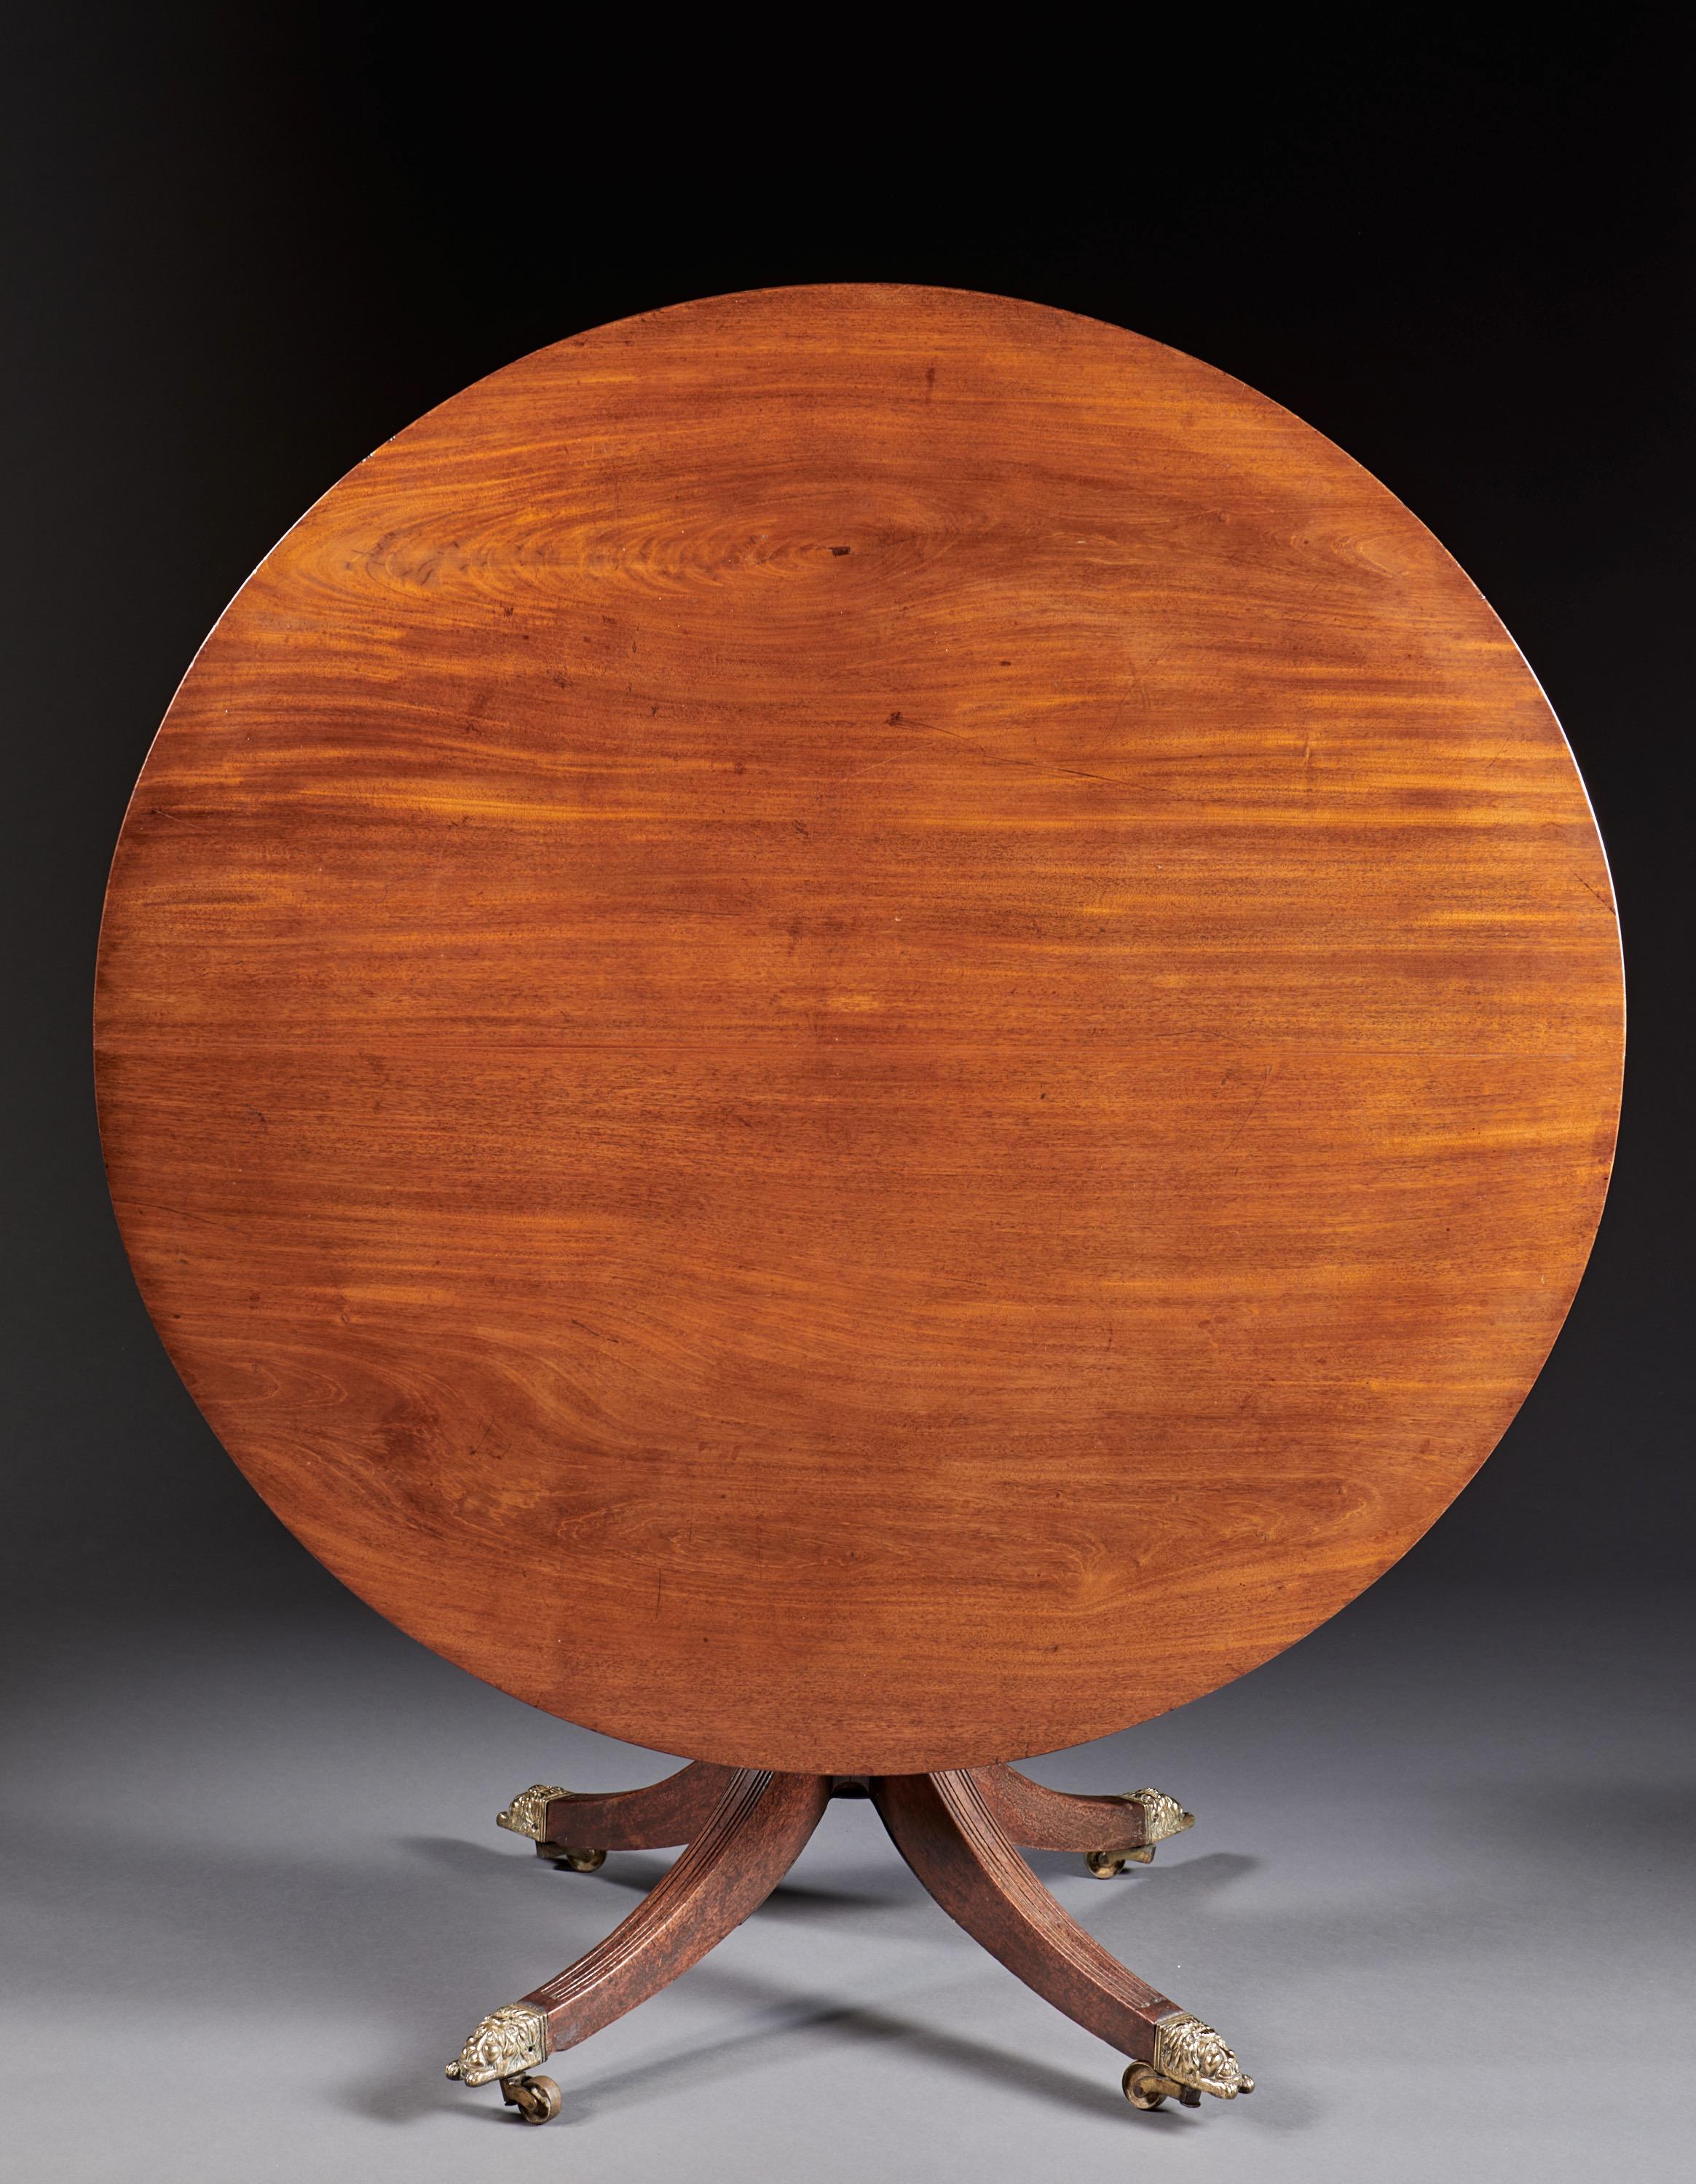 A fine English Sheraton period mahogany round breakfast table with tilting top and reeded edge. The figural top is raised on a turned pedestal with four downswept molded legs ending in dramatic recumbent lion castered feet. English, circa 1790.